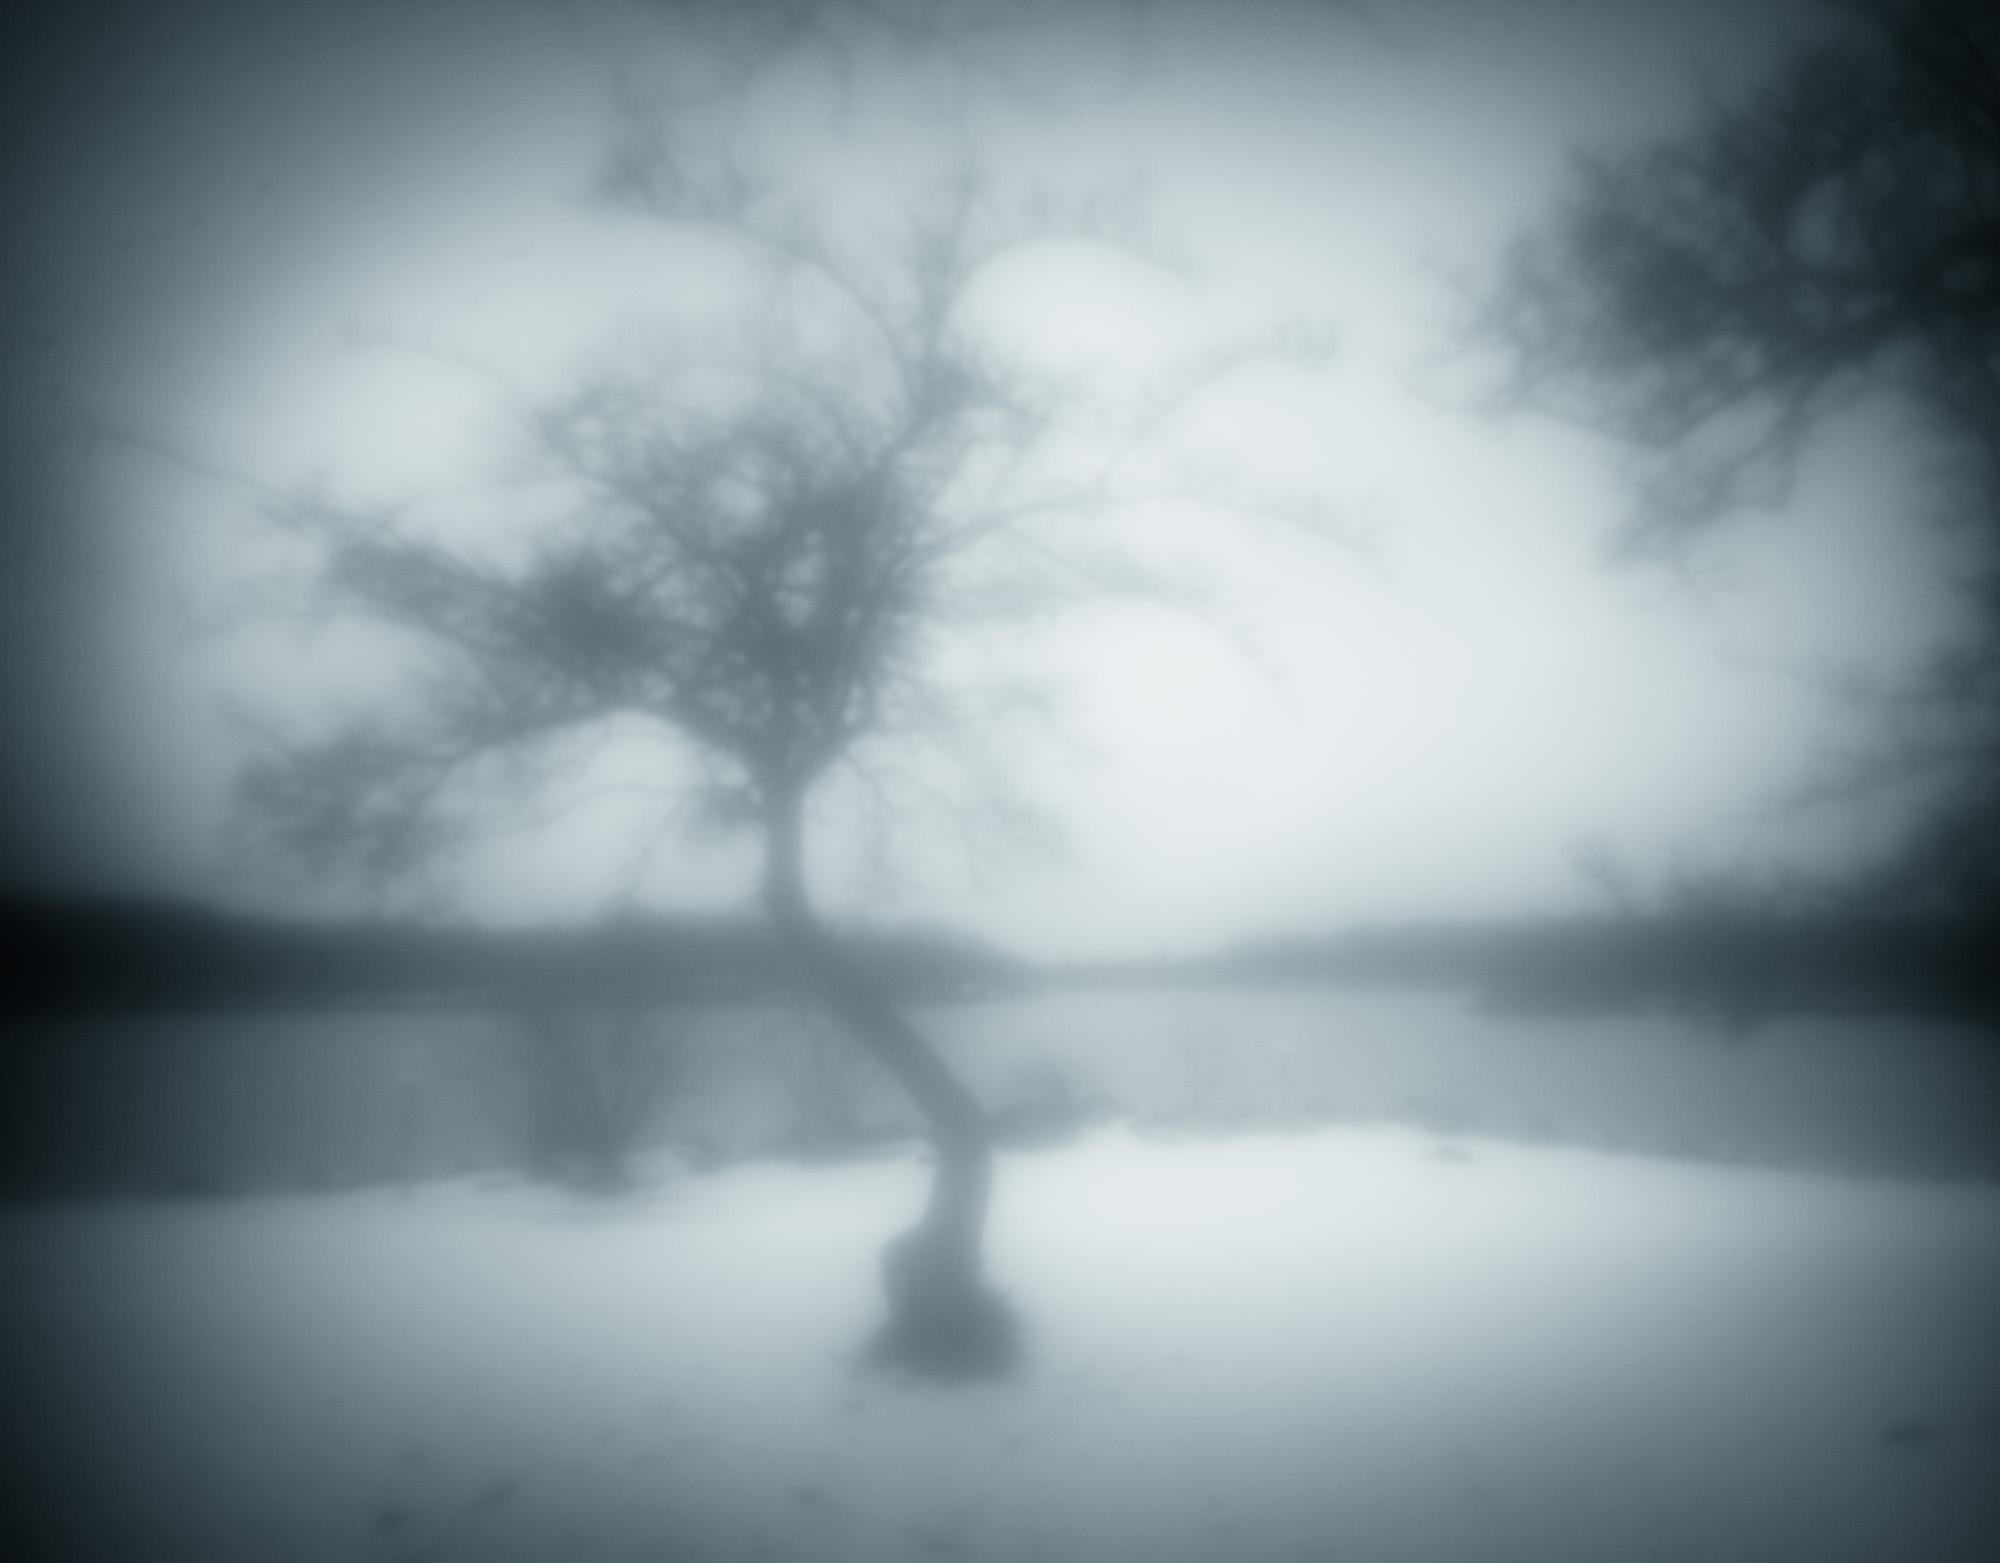 Limited Edition Black and White Photograph  "One Winter Tree" 20 x 24